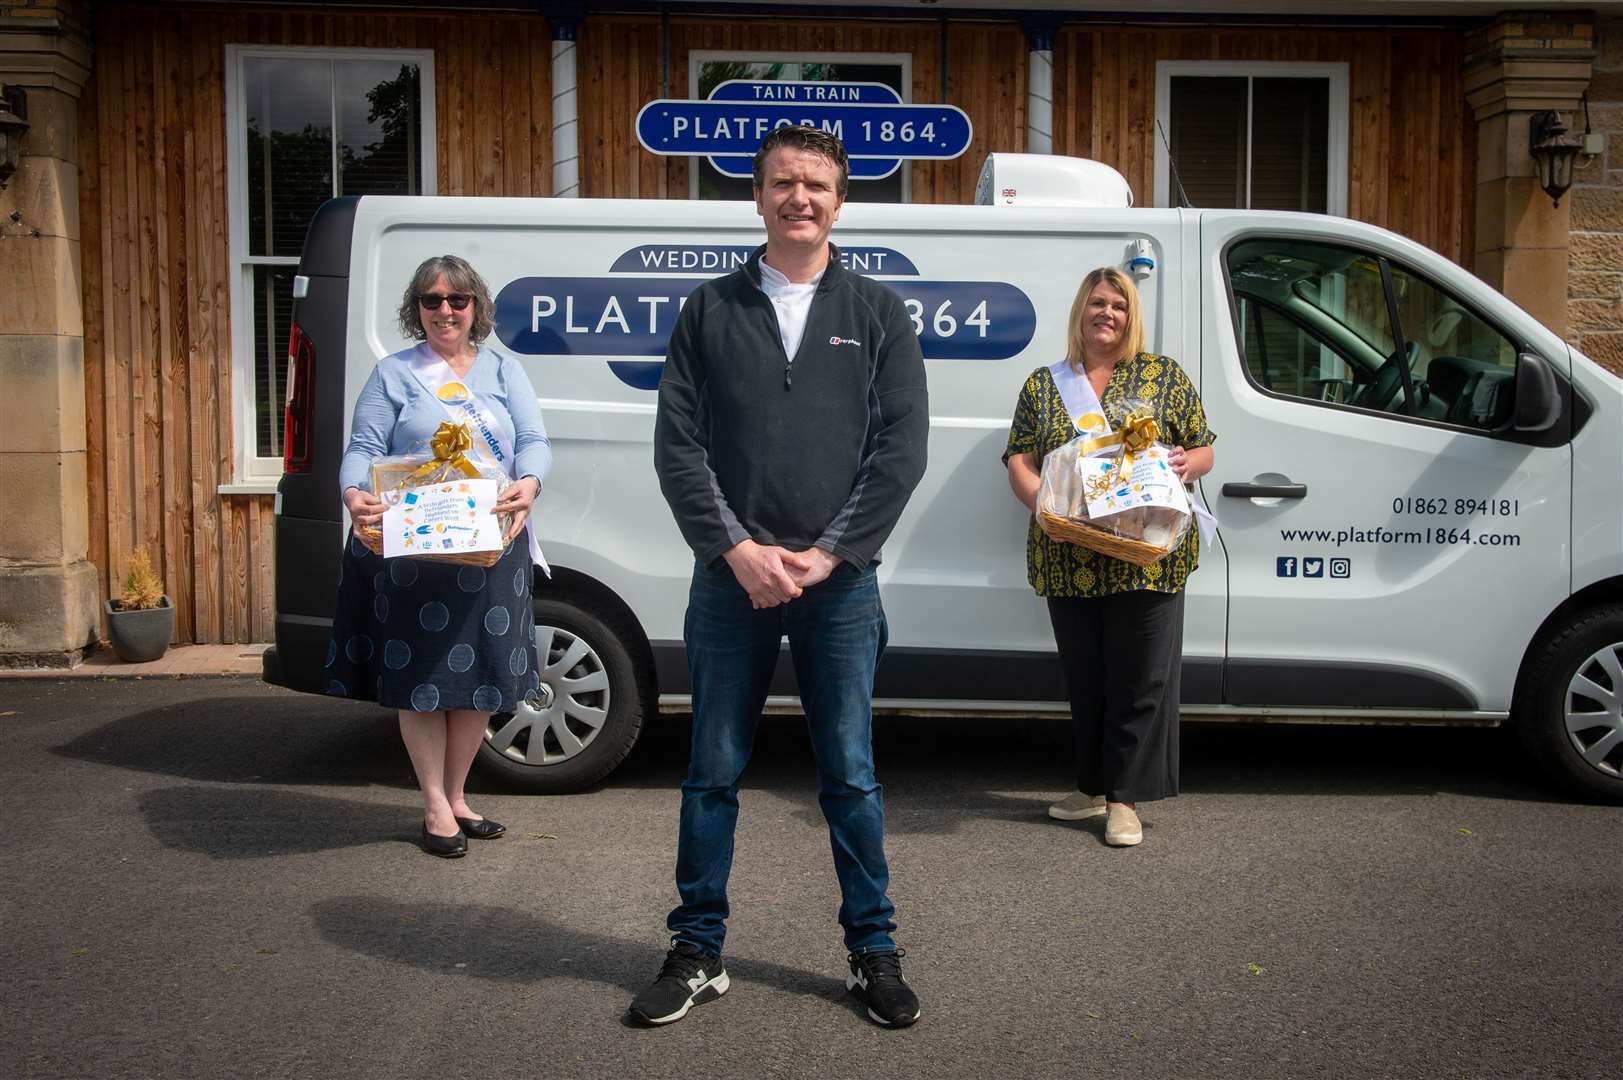 Platform 1864 owner Graham Rooney setting off to deliver 24 afternoon teas in hampers to carers on the Black Isle, Ross-shire, Inverness and Nairn on behalf of Befrienders Highland to mark Carers Week. Graham is pictured with Befrienders Highland volunteers Susan White (left) and Carol Summers .Picture:Callum Mackay